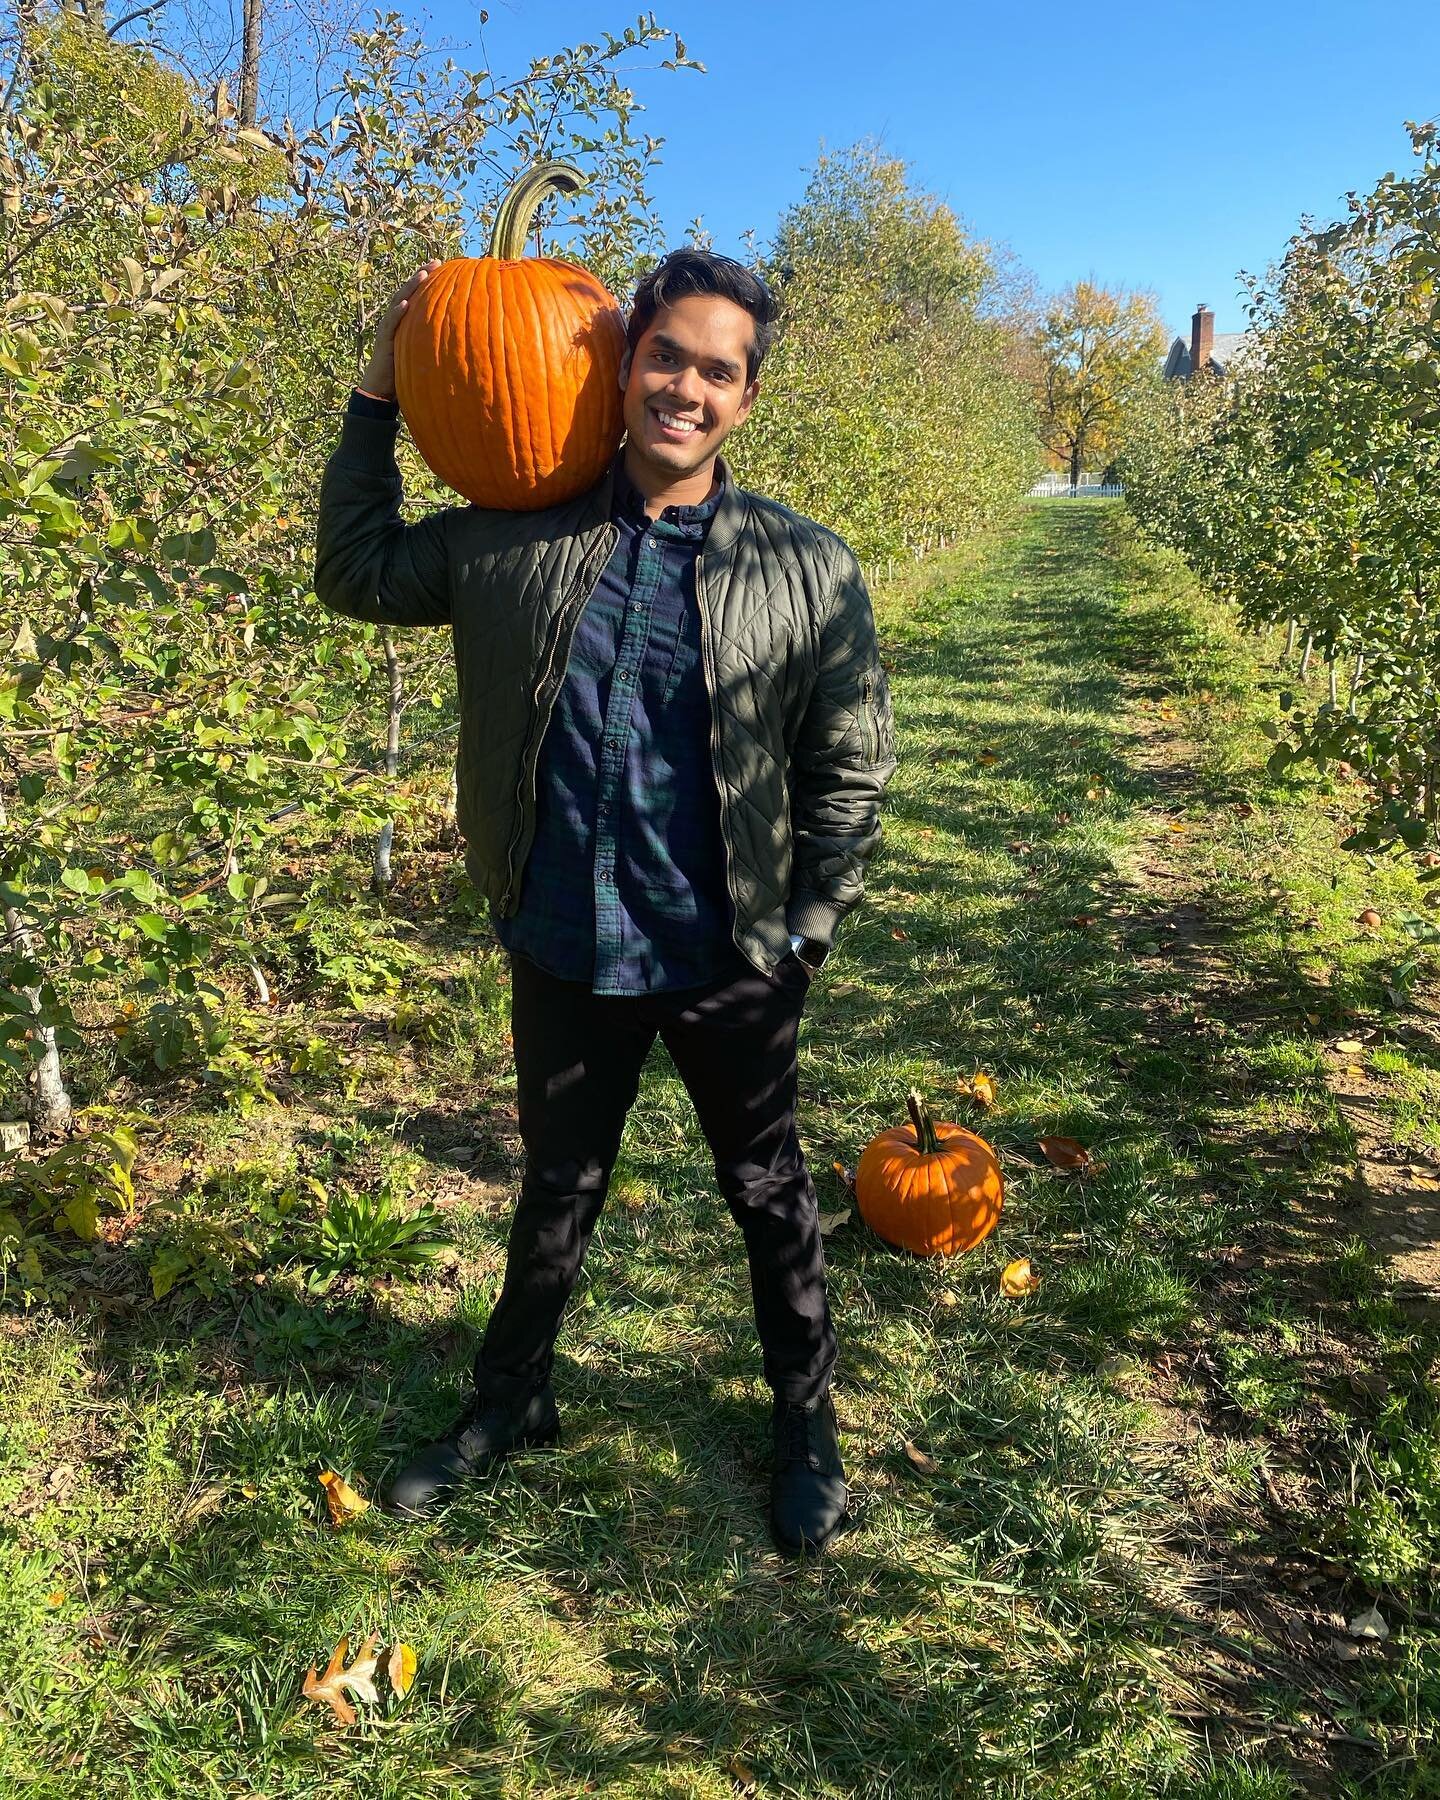 wishing a very happy 28th birthday to my favorite person in the 🌎 !! literally no one else would look this cute posing with pumpkins in the middle of an empty apple orchard 💕 love ya @shyam_ !